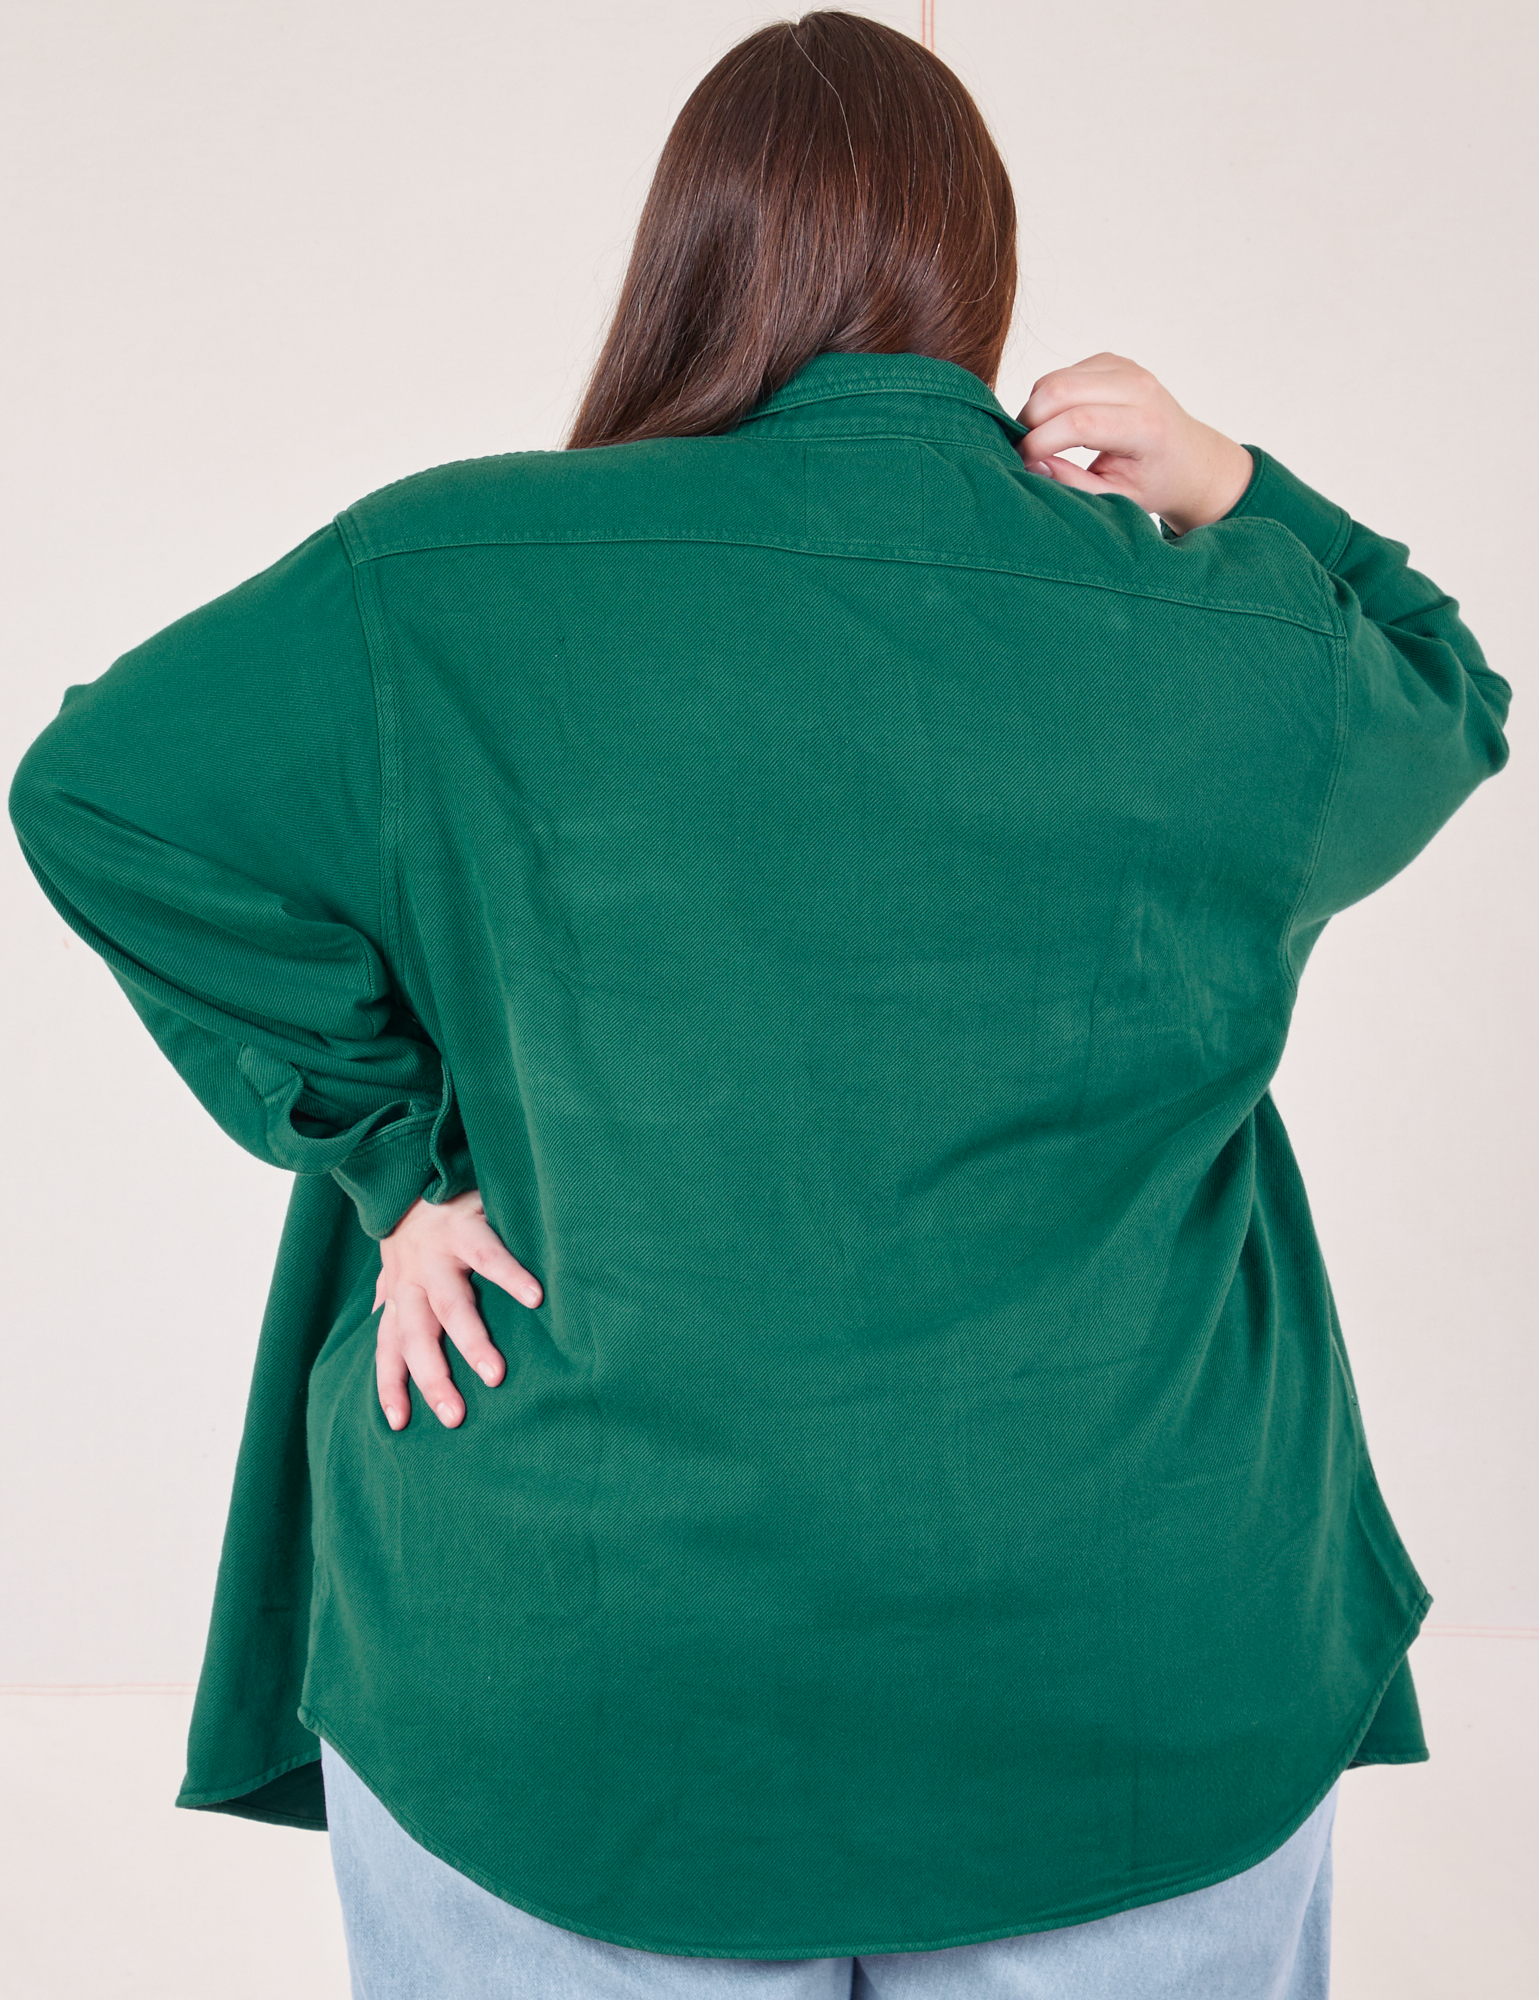 Back view of Flannel Overshirt in Hunter Green on Marielena